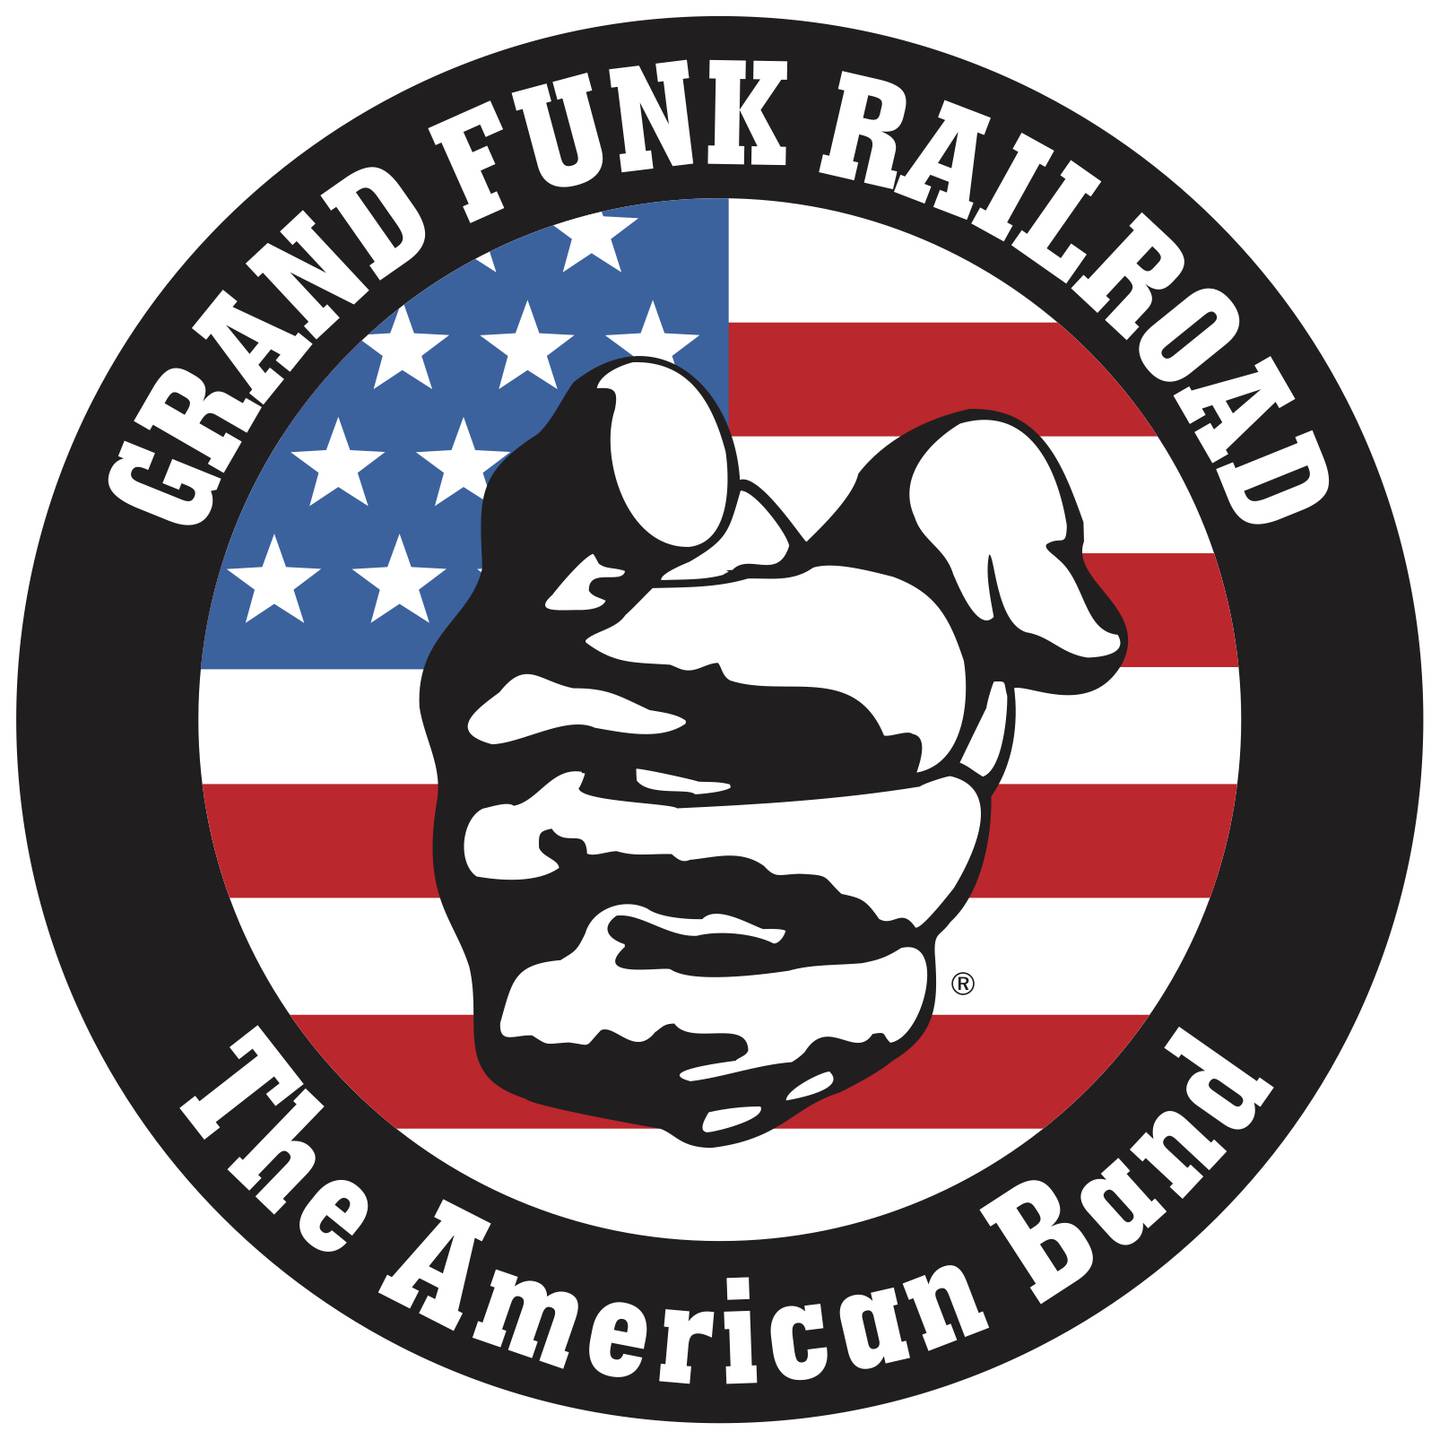 Grand Funk Railroad will play the Arcada Theatre in St. Charles on Thursday, April 11.